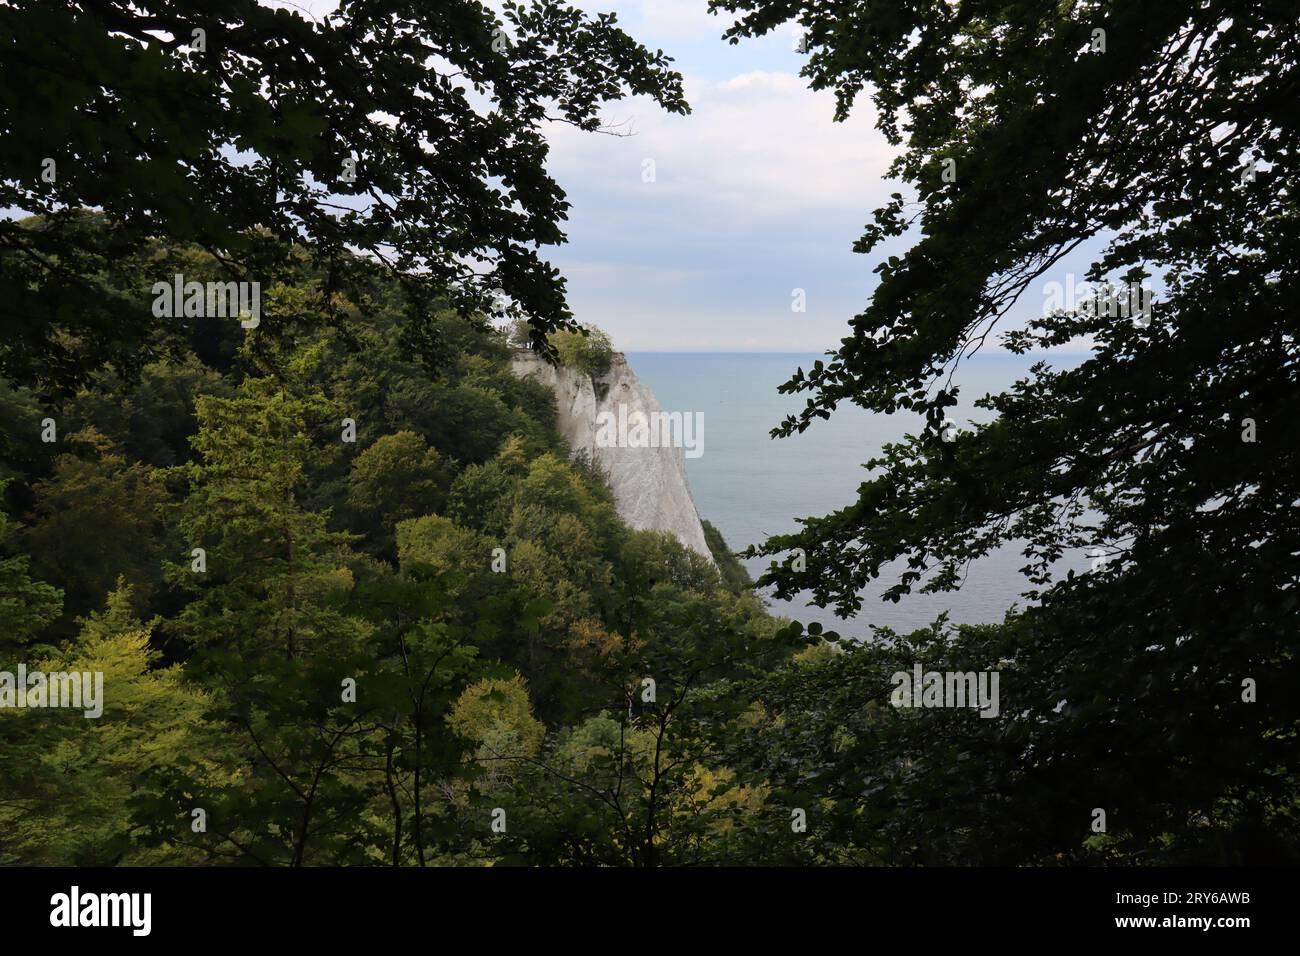 View of the Skywalk 'Kaiserstuhl' above the white chalk cliffs in the Jasmund National Park on the Baltic Sea island of Rügen Stock Photo